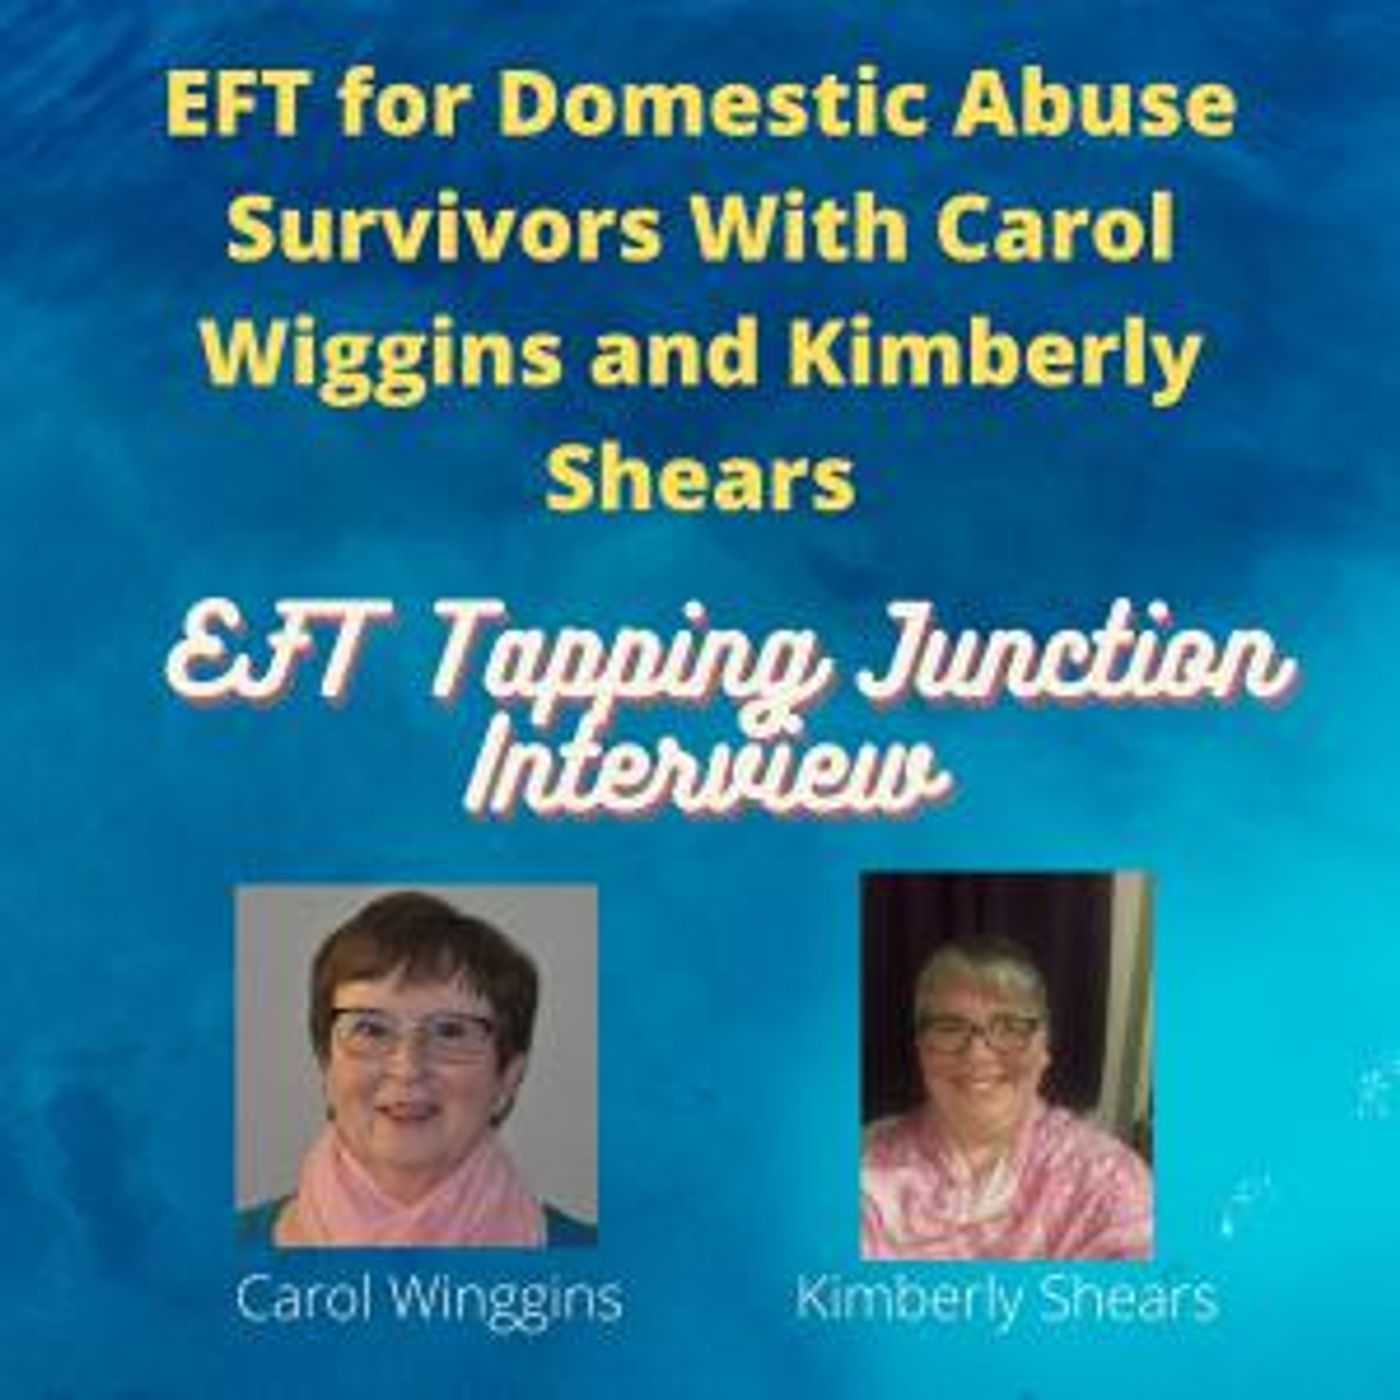 EFT for Domestic Abuse Survivors With Carol Wiggins and Kimberly Shears